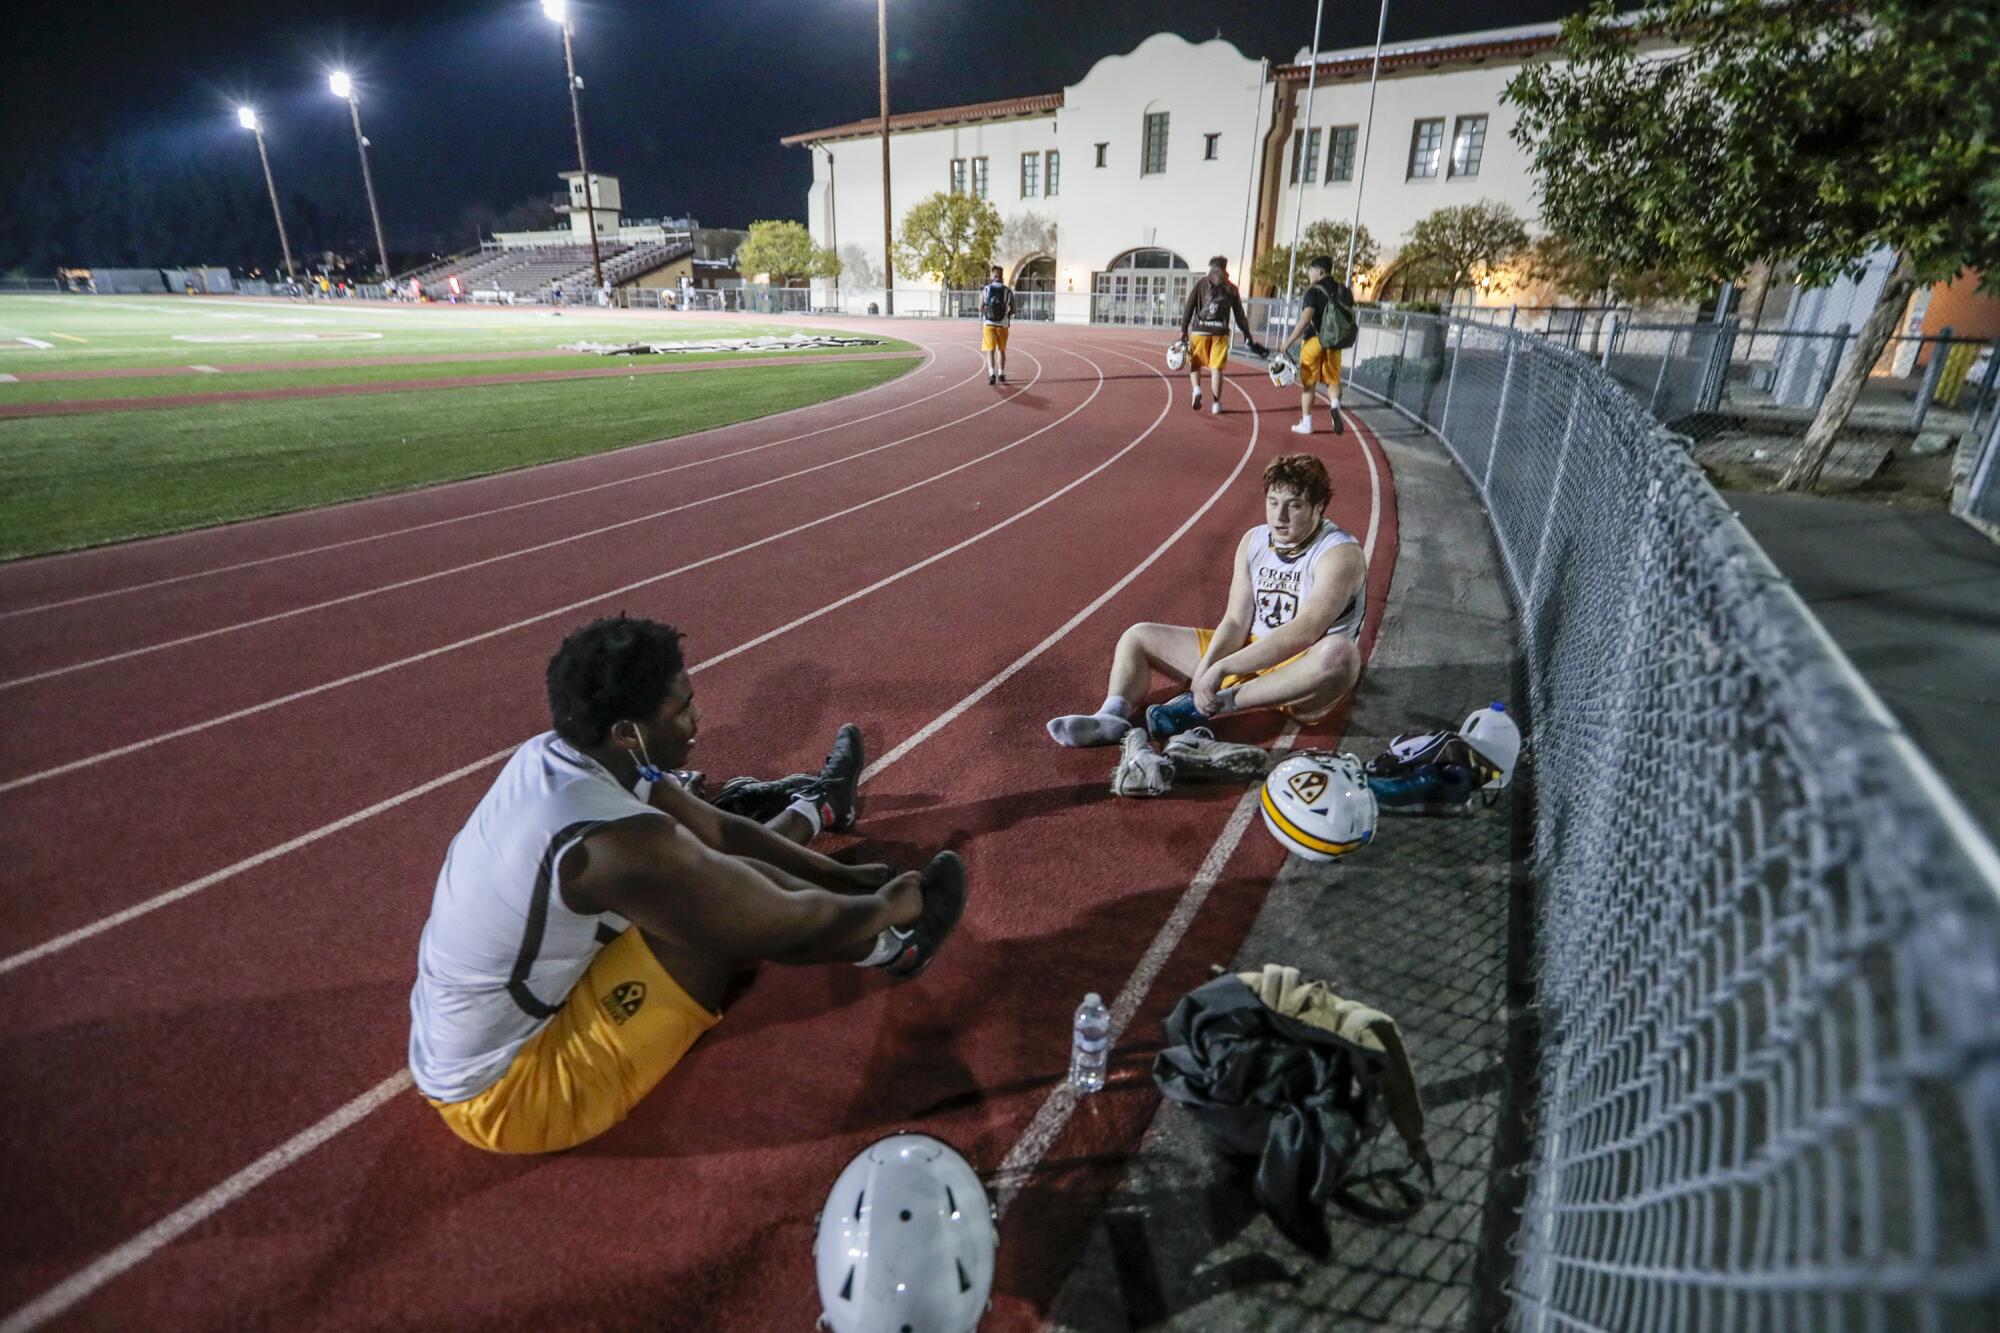 Kaliq Wilkens and Anthony Calfo change their shoes on the track following practice at Crespi High.